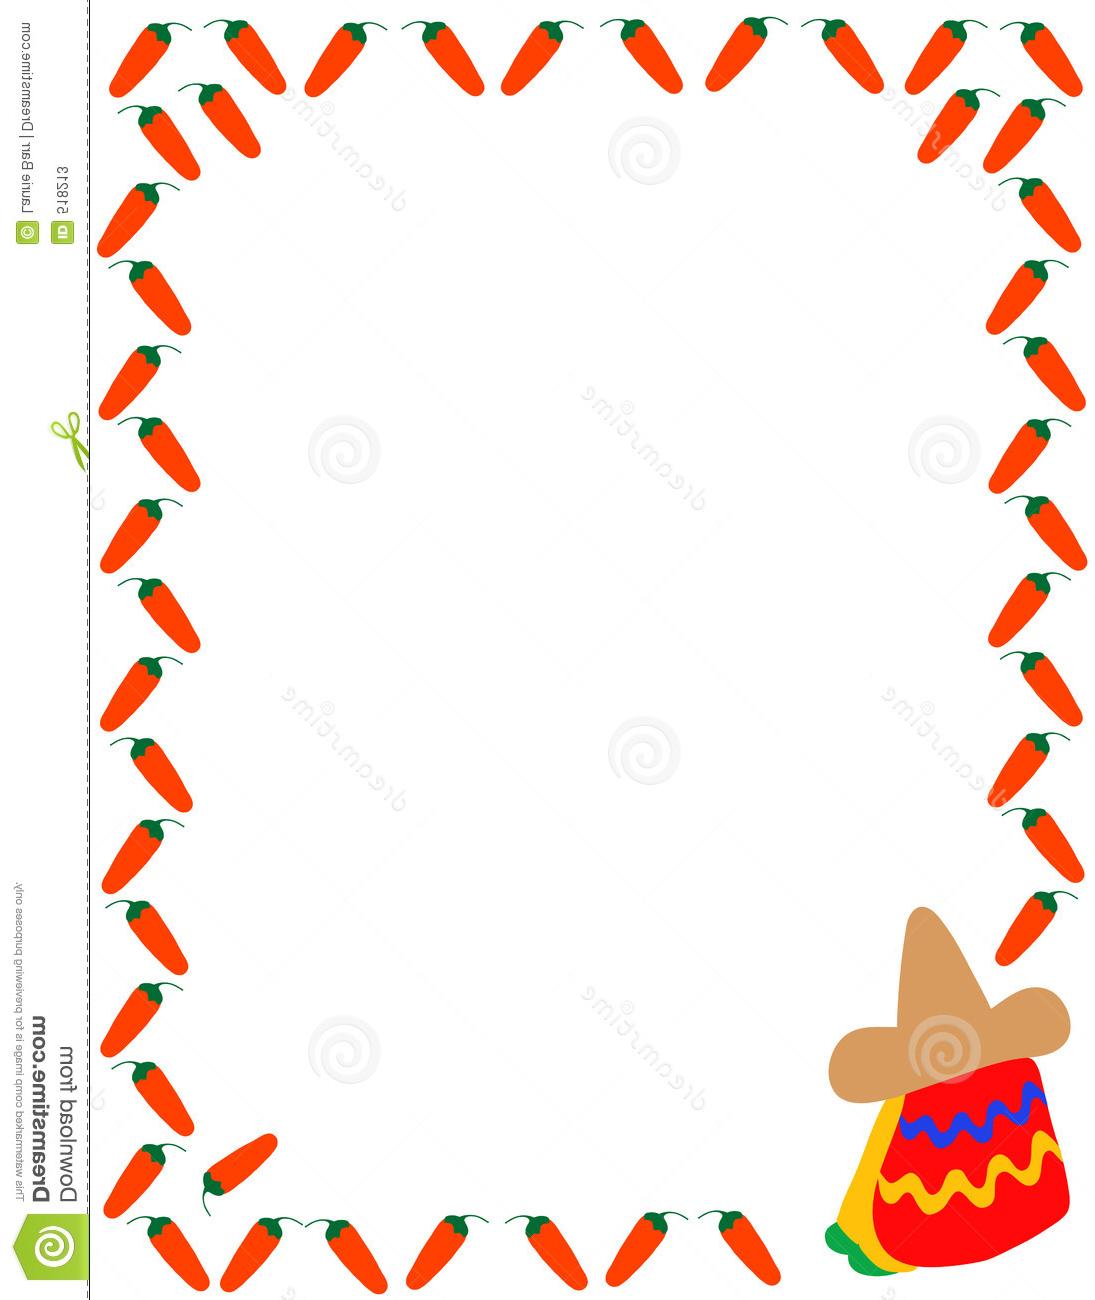 mexican clipart boarder